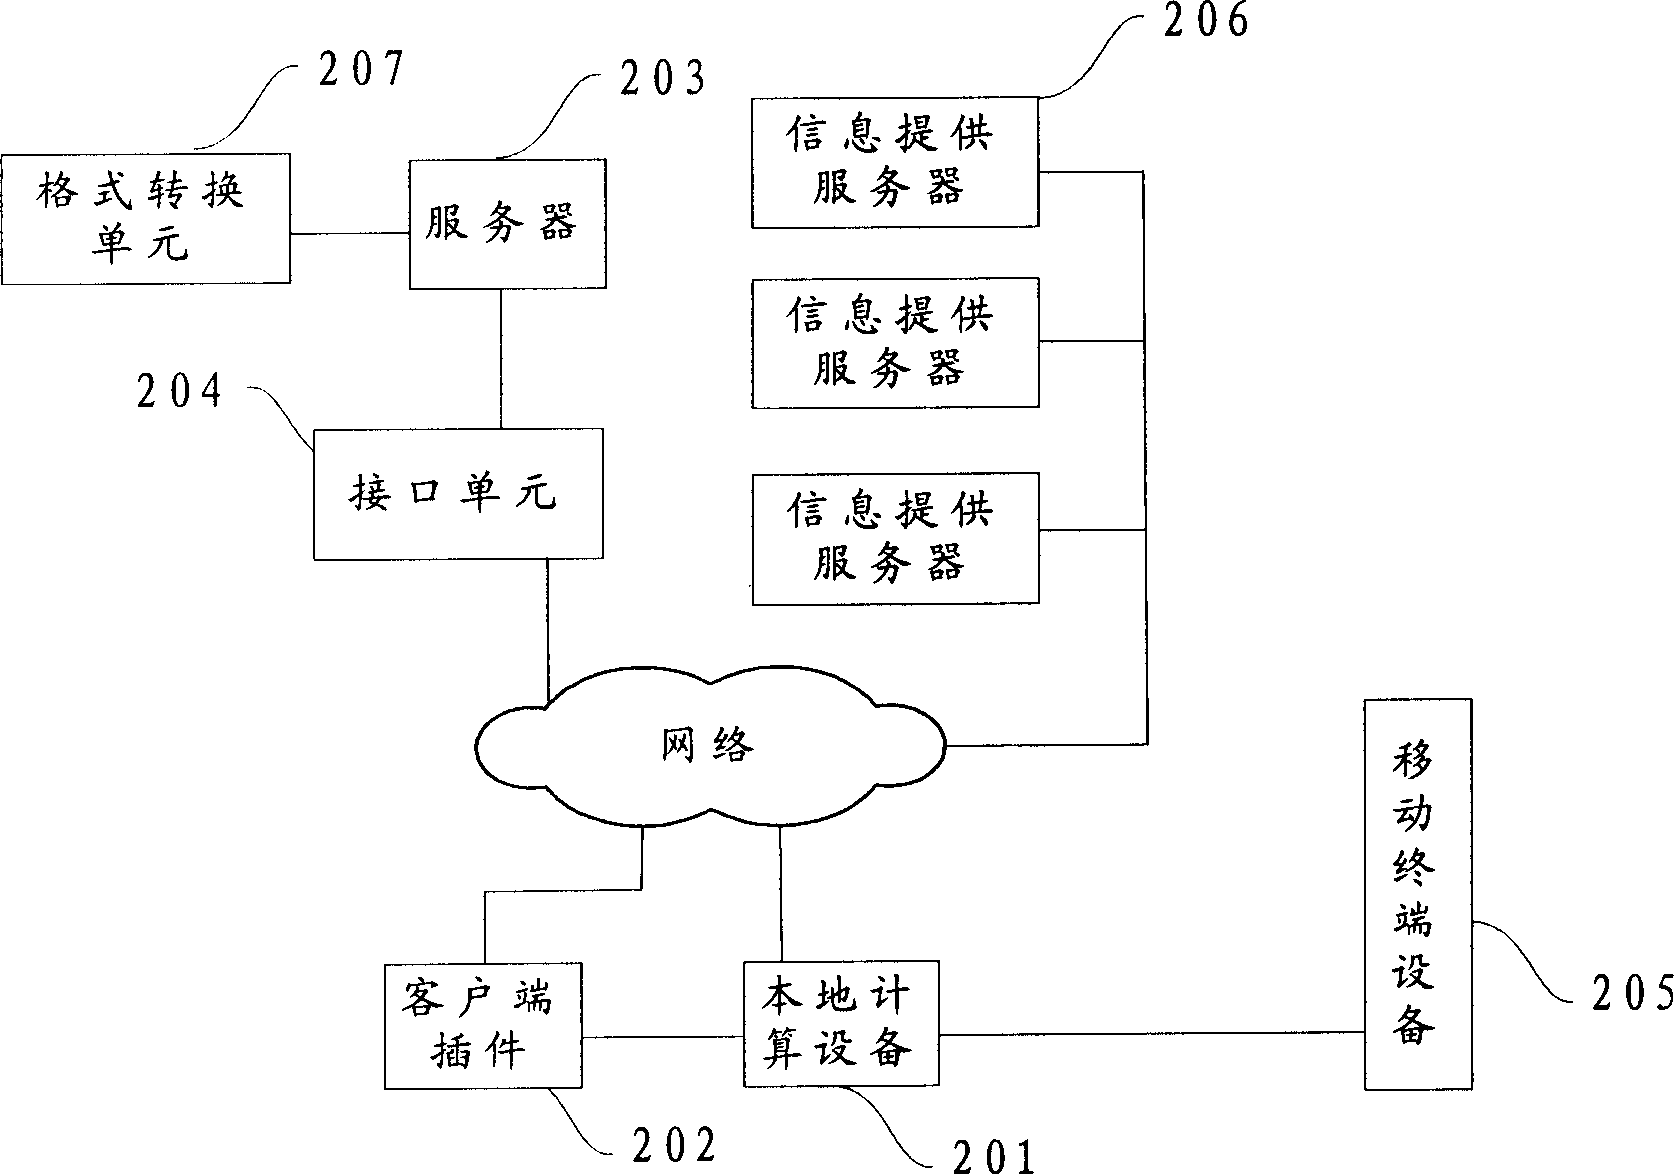 Method and system for mobile terminal device obtaining computer information